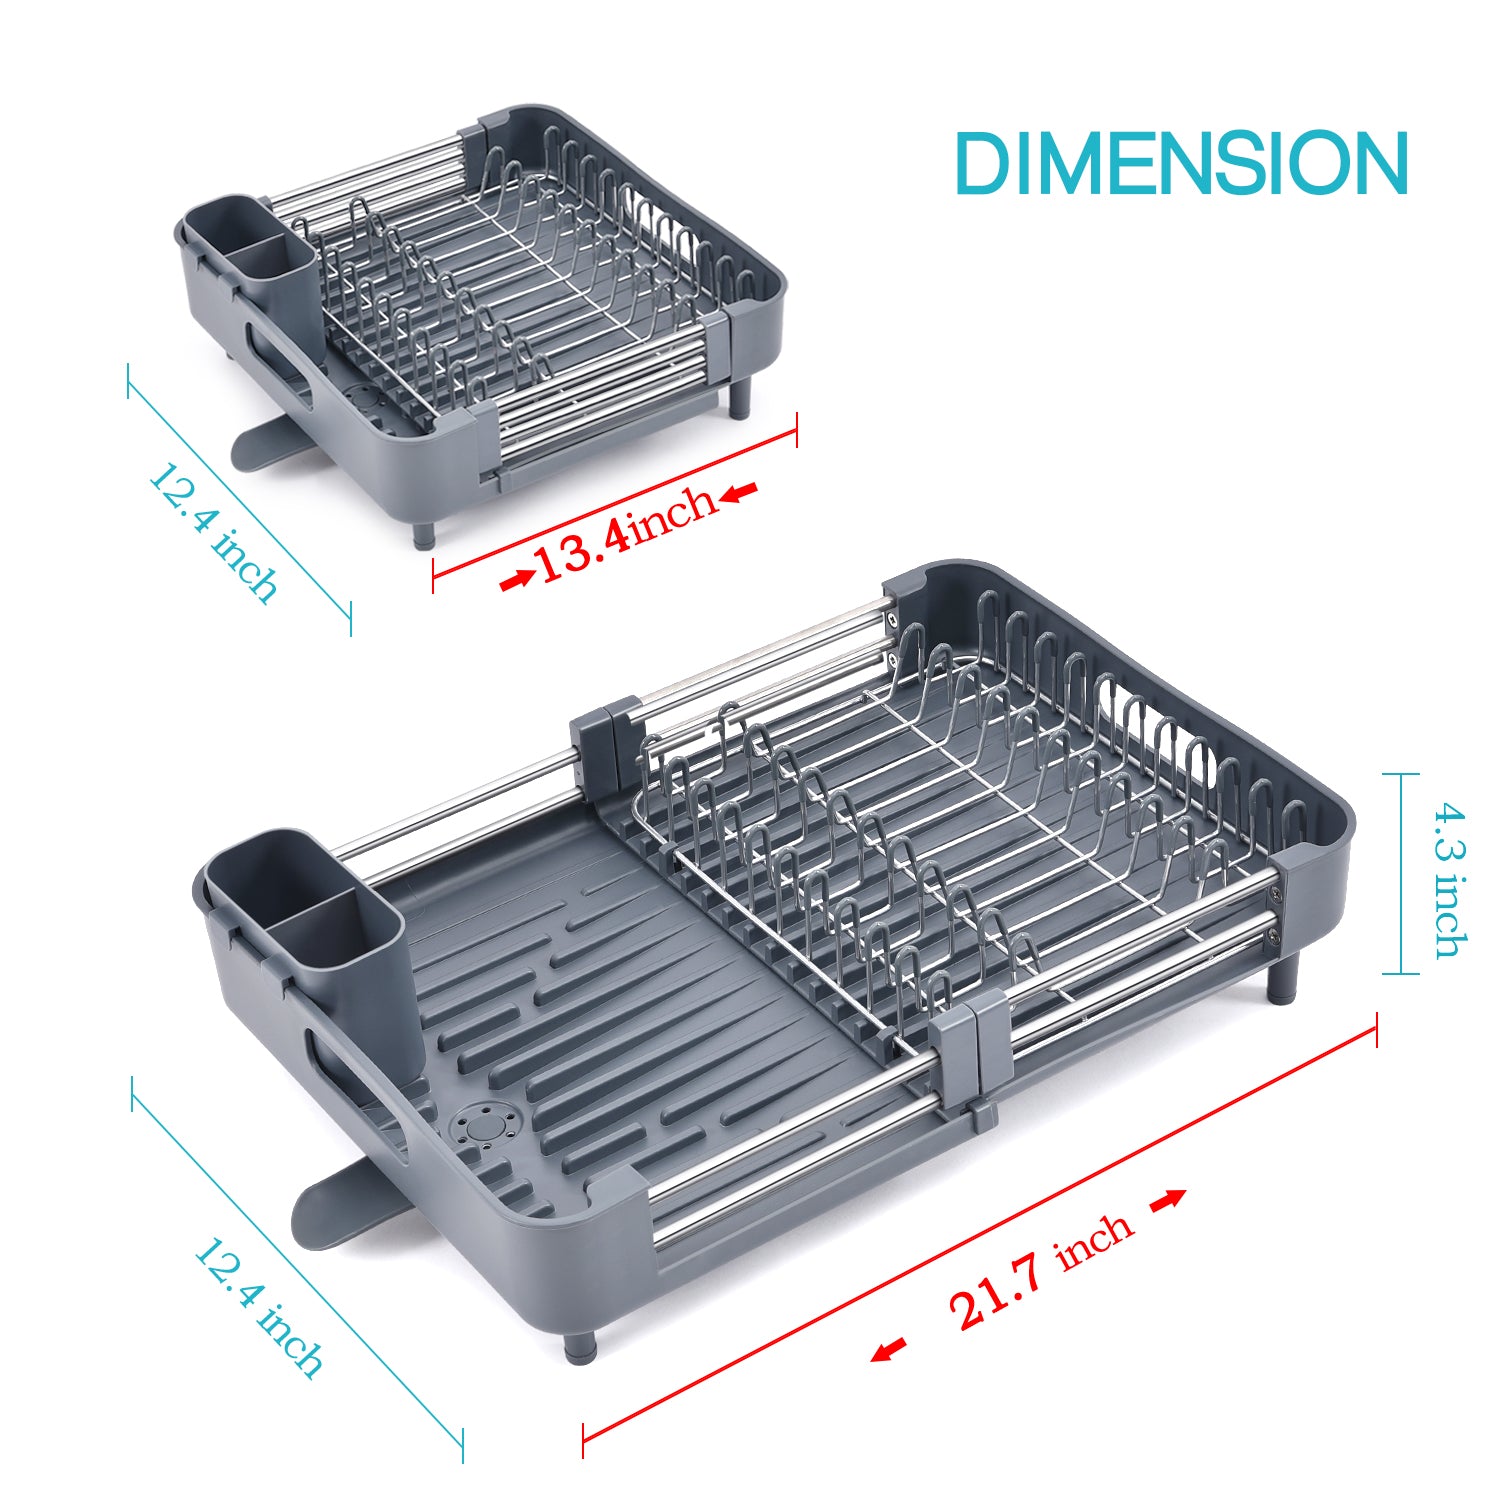  KINGRACK Dish Drying Rack - Extendable Dish Rack - Durable  Stainless Steel Dish Drainer for Kitchen Counter with Drainboard Set,  Swivel Spout,Utensil Holder